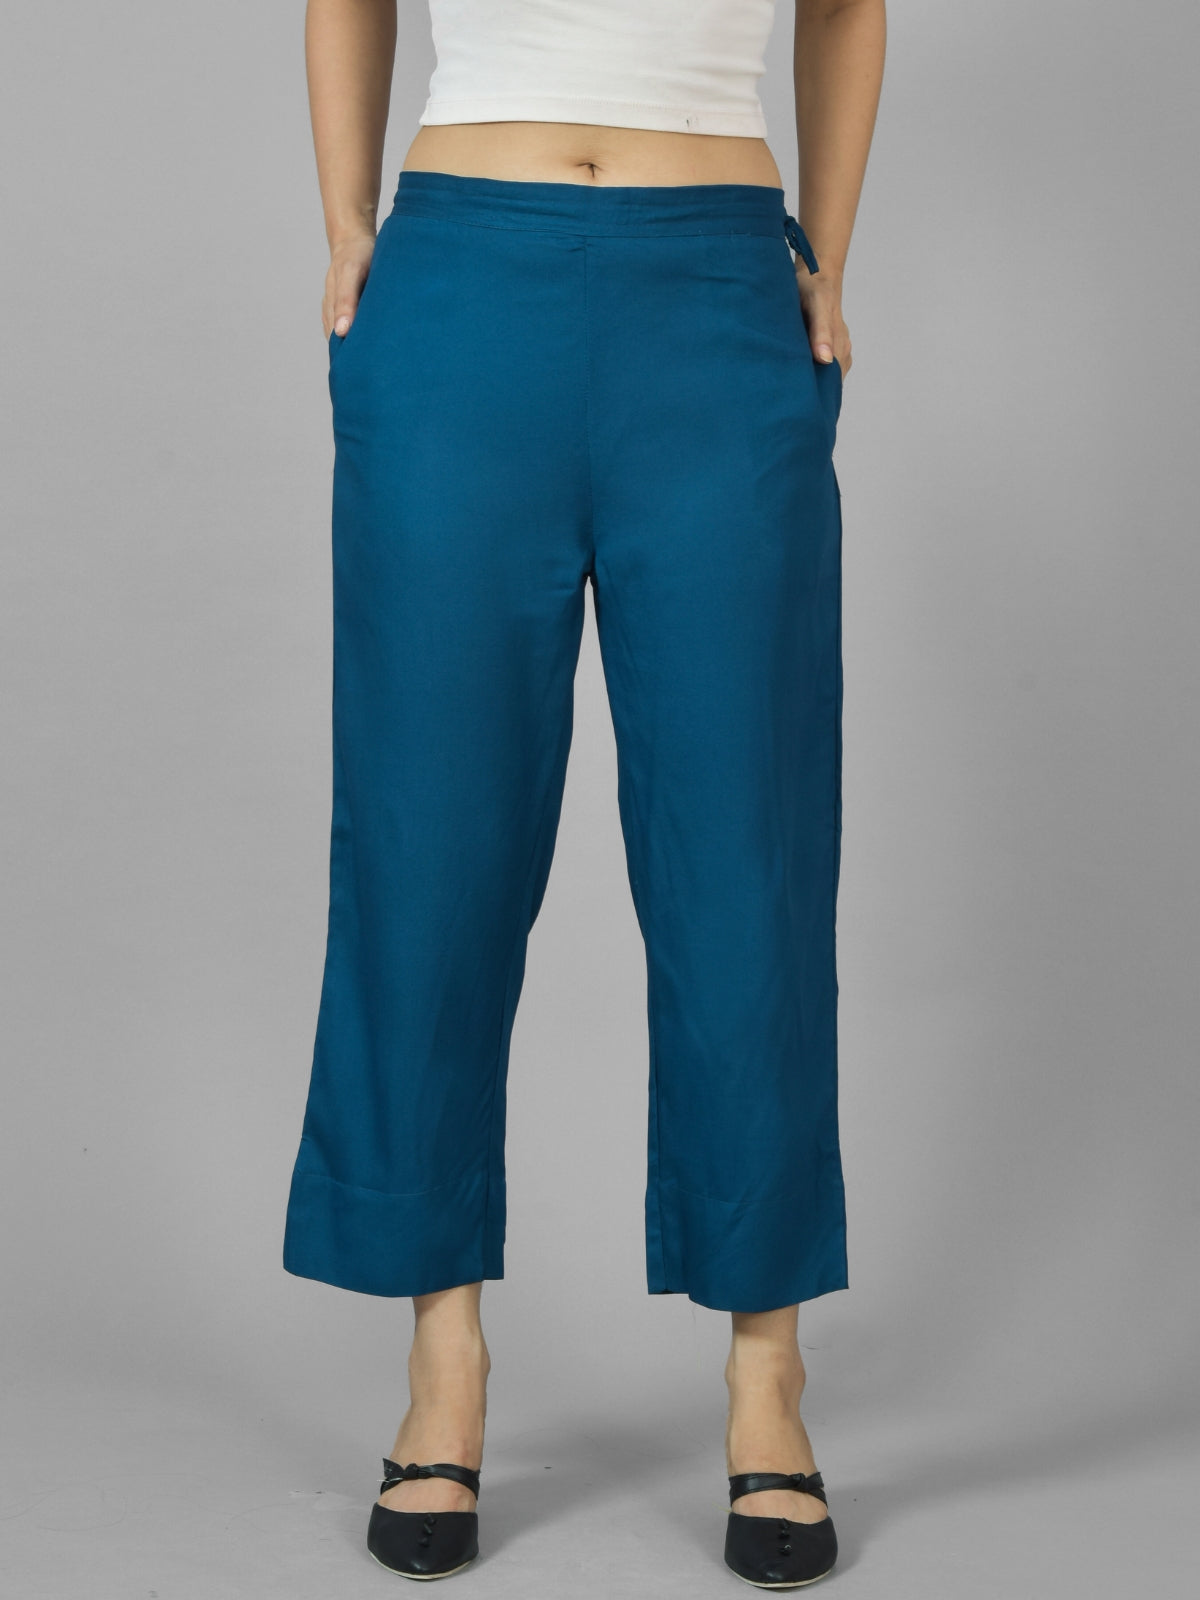 Pack Of 2 Womens Mustard And Teal Blue Ankle Length Rayon Culottes Trouser Combo